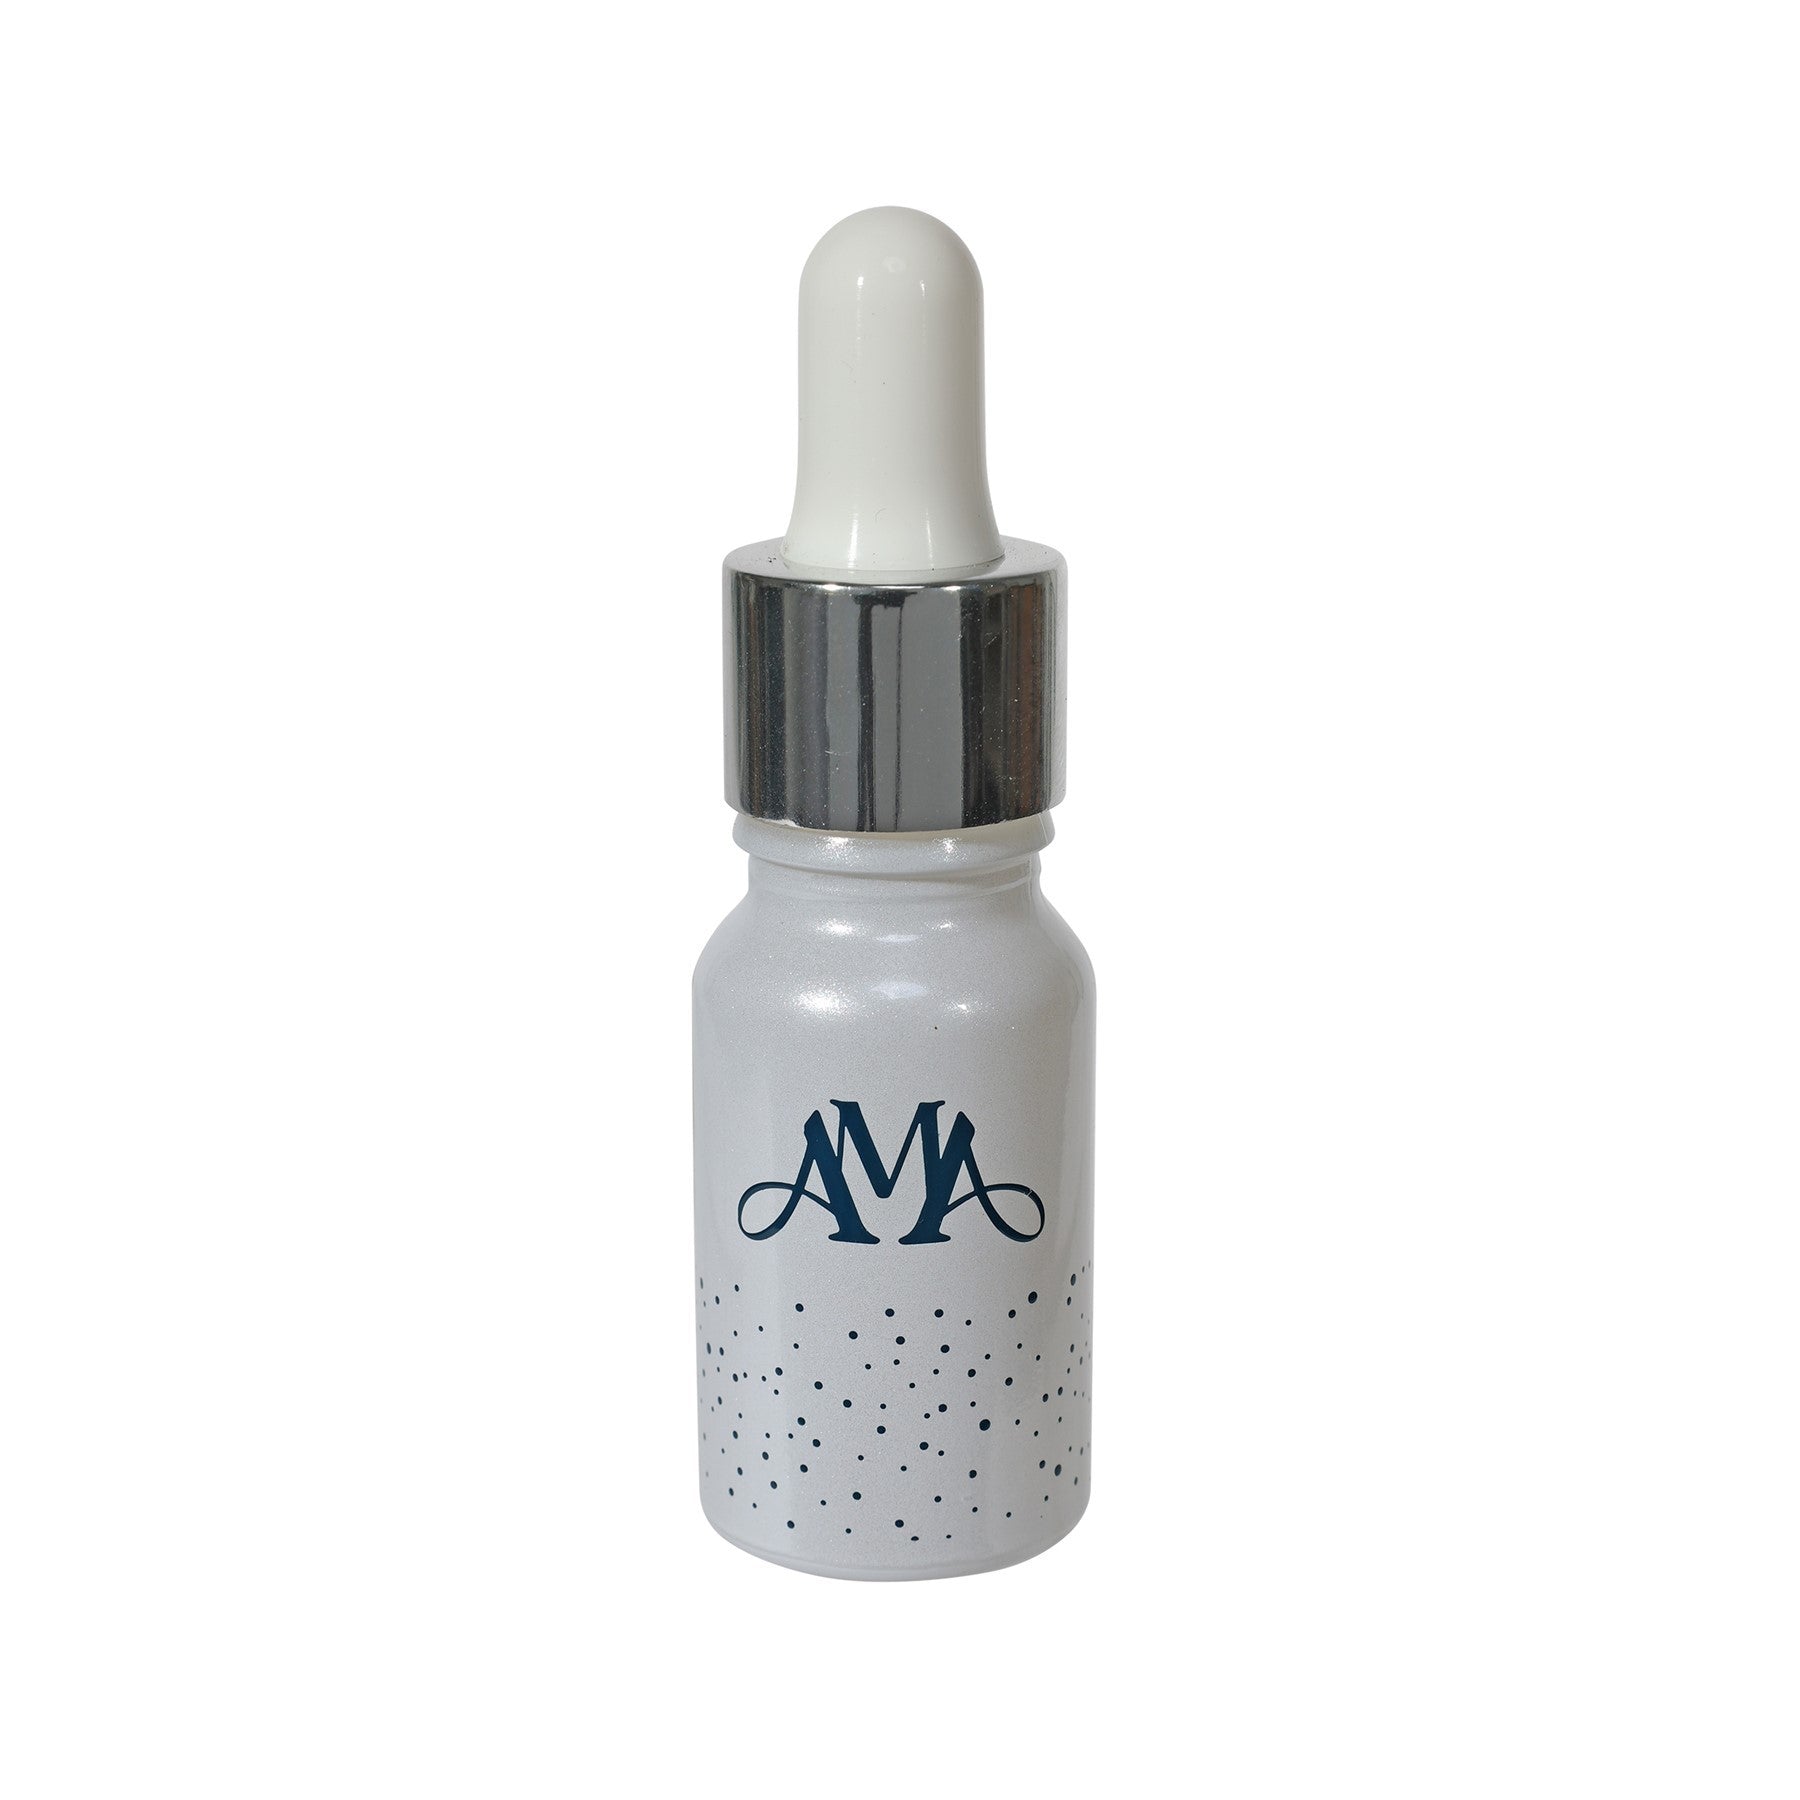 View Ava May English Pear Freesia Aroma Oil information